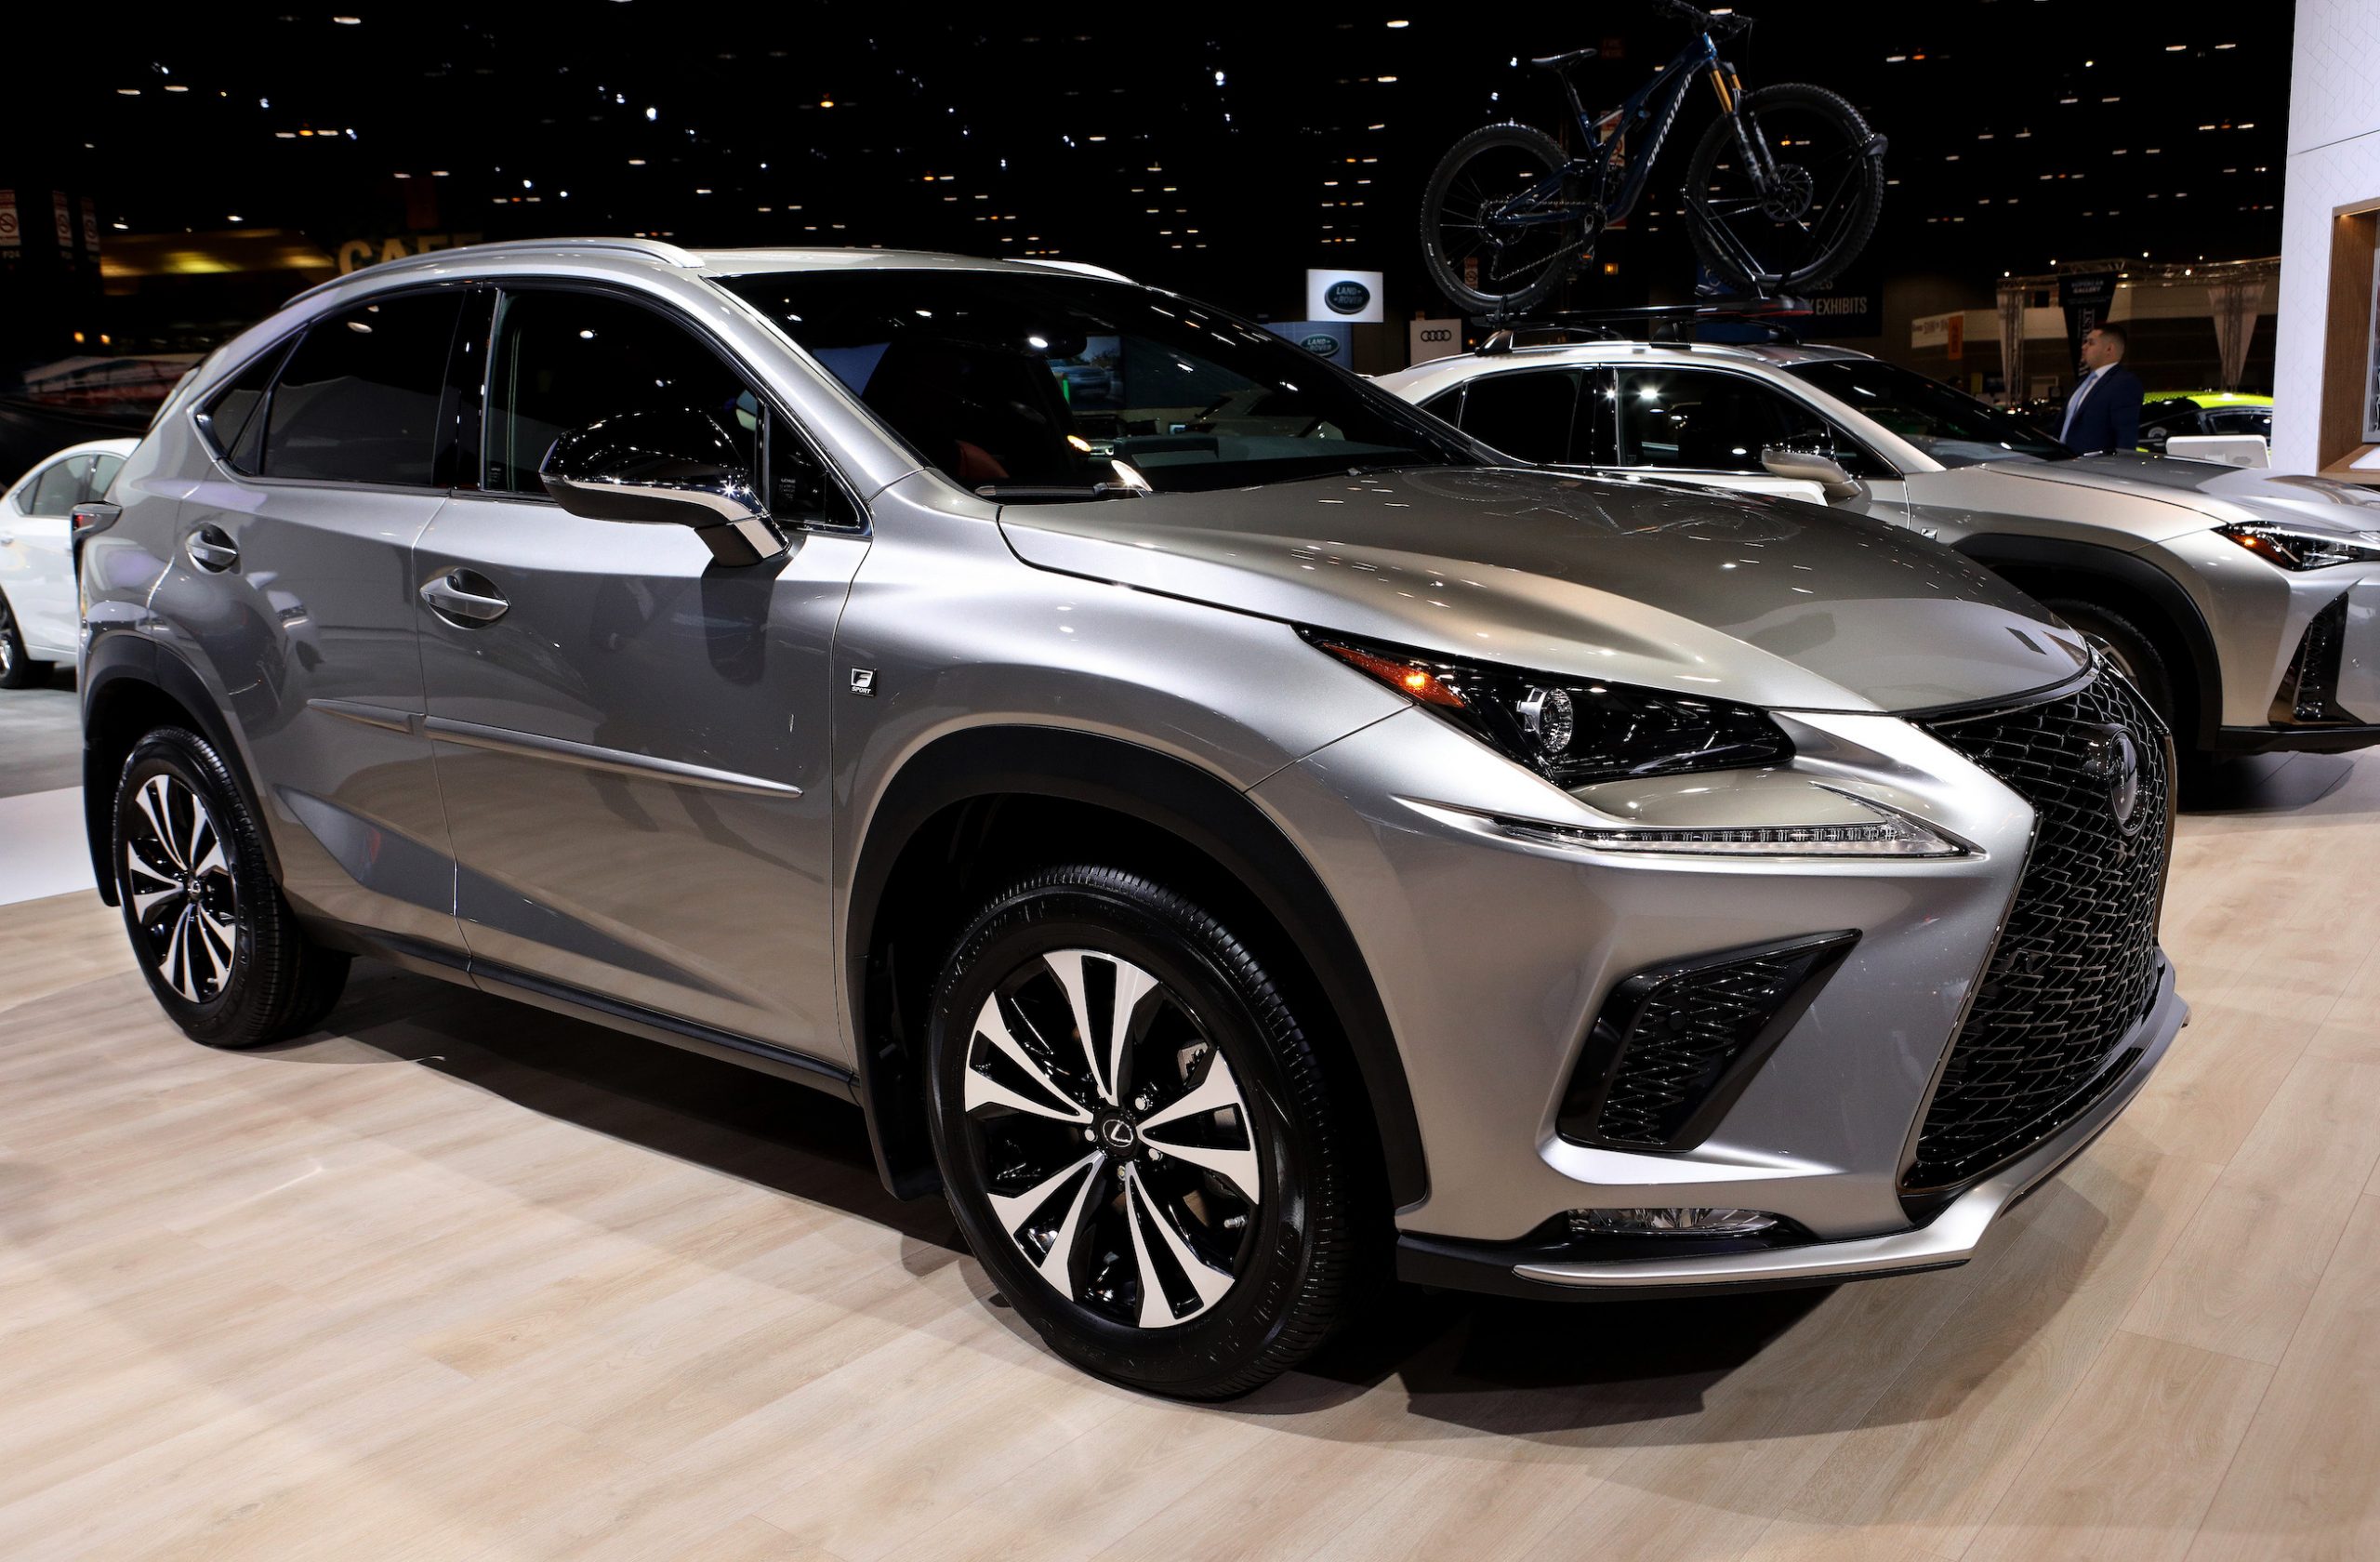 2020 Lexus NX 300 is on display at the 112th Annual Chicago Auto Show